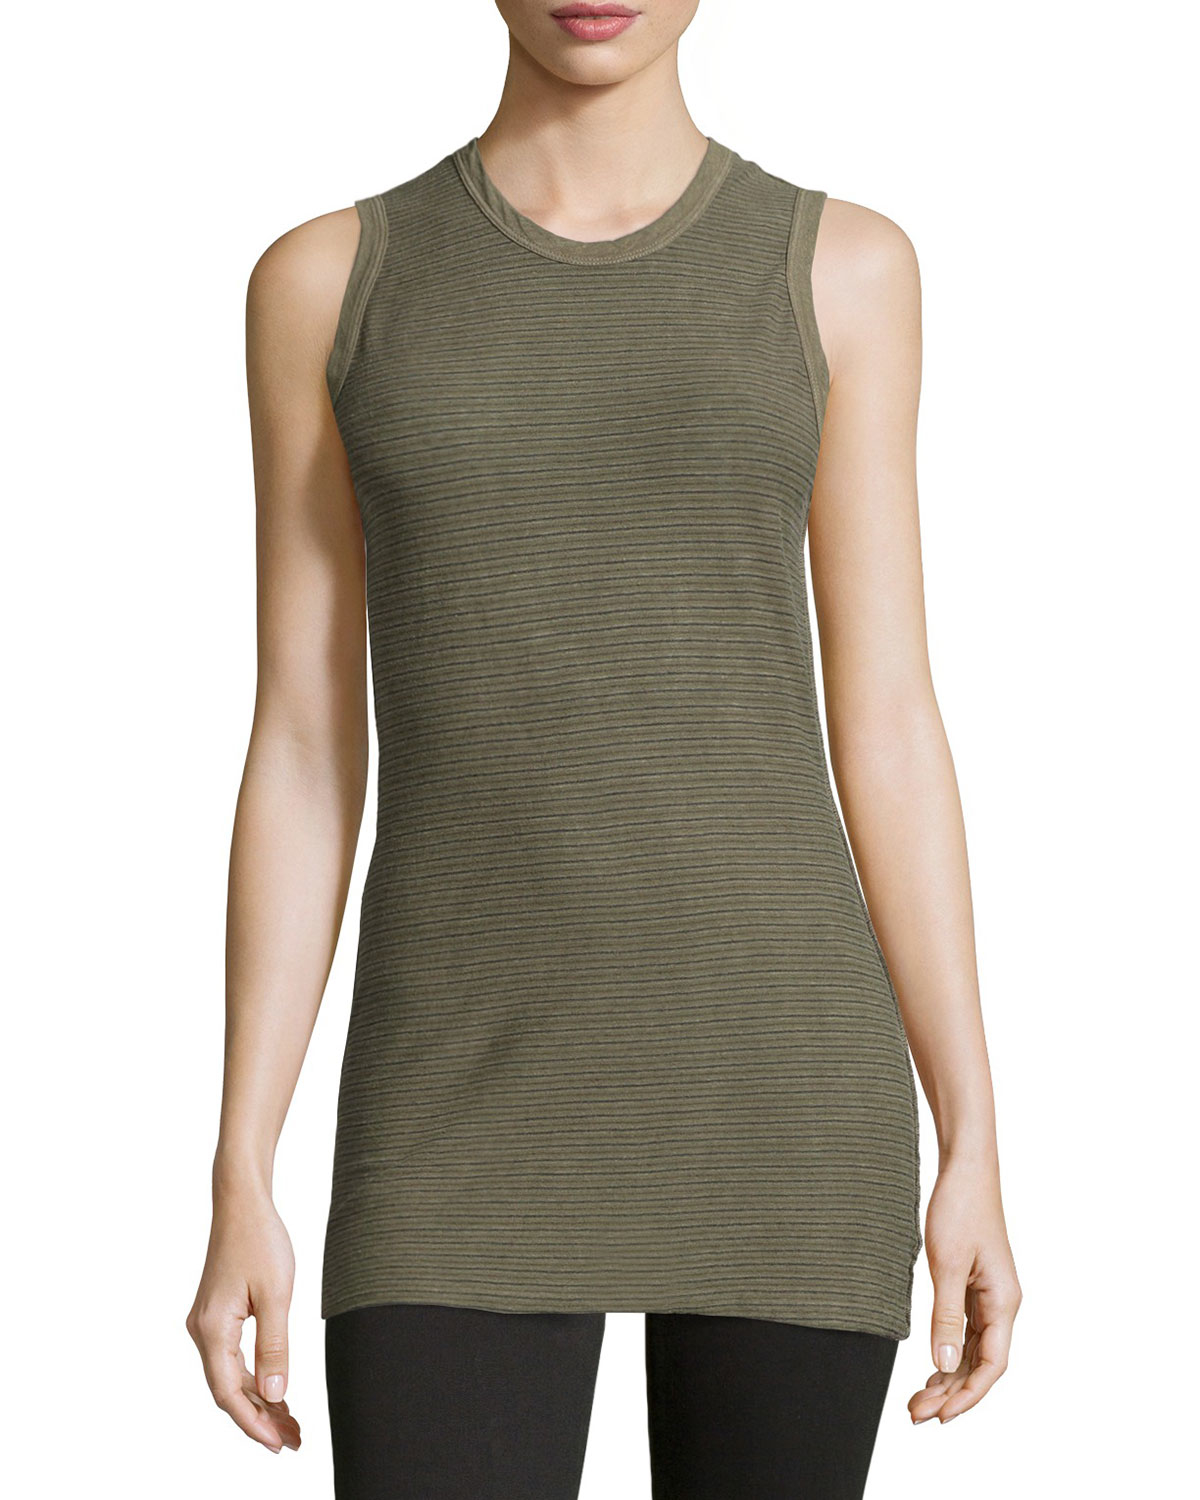 James perse Striped Cotton-blend Jersey Tank in Green | Lyst